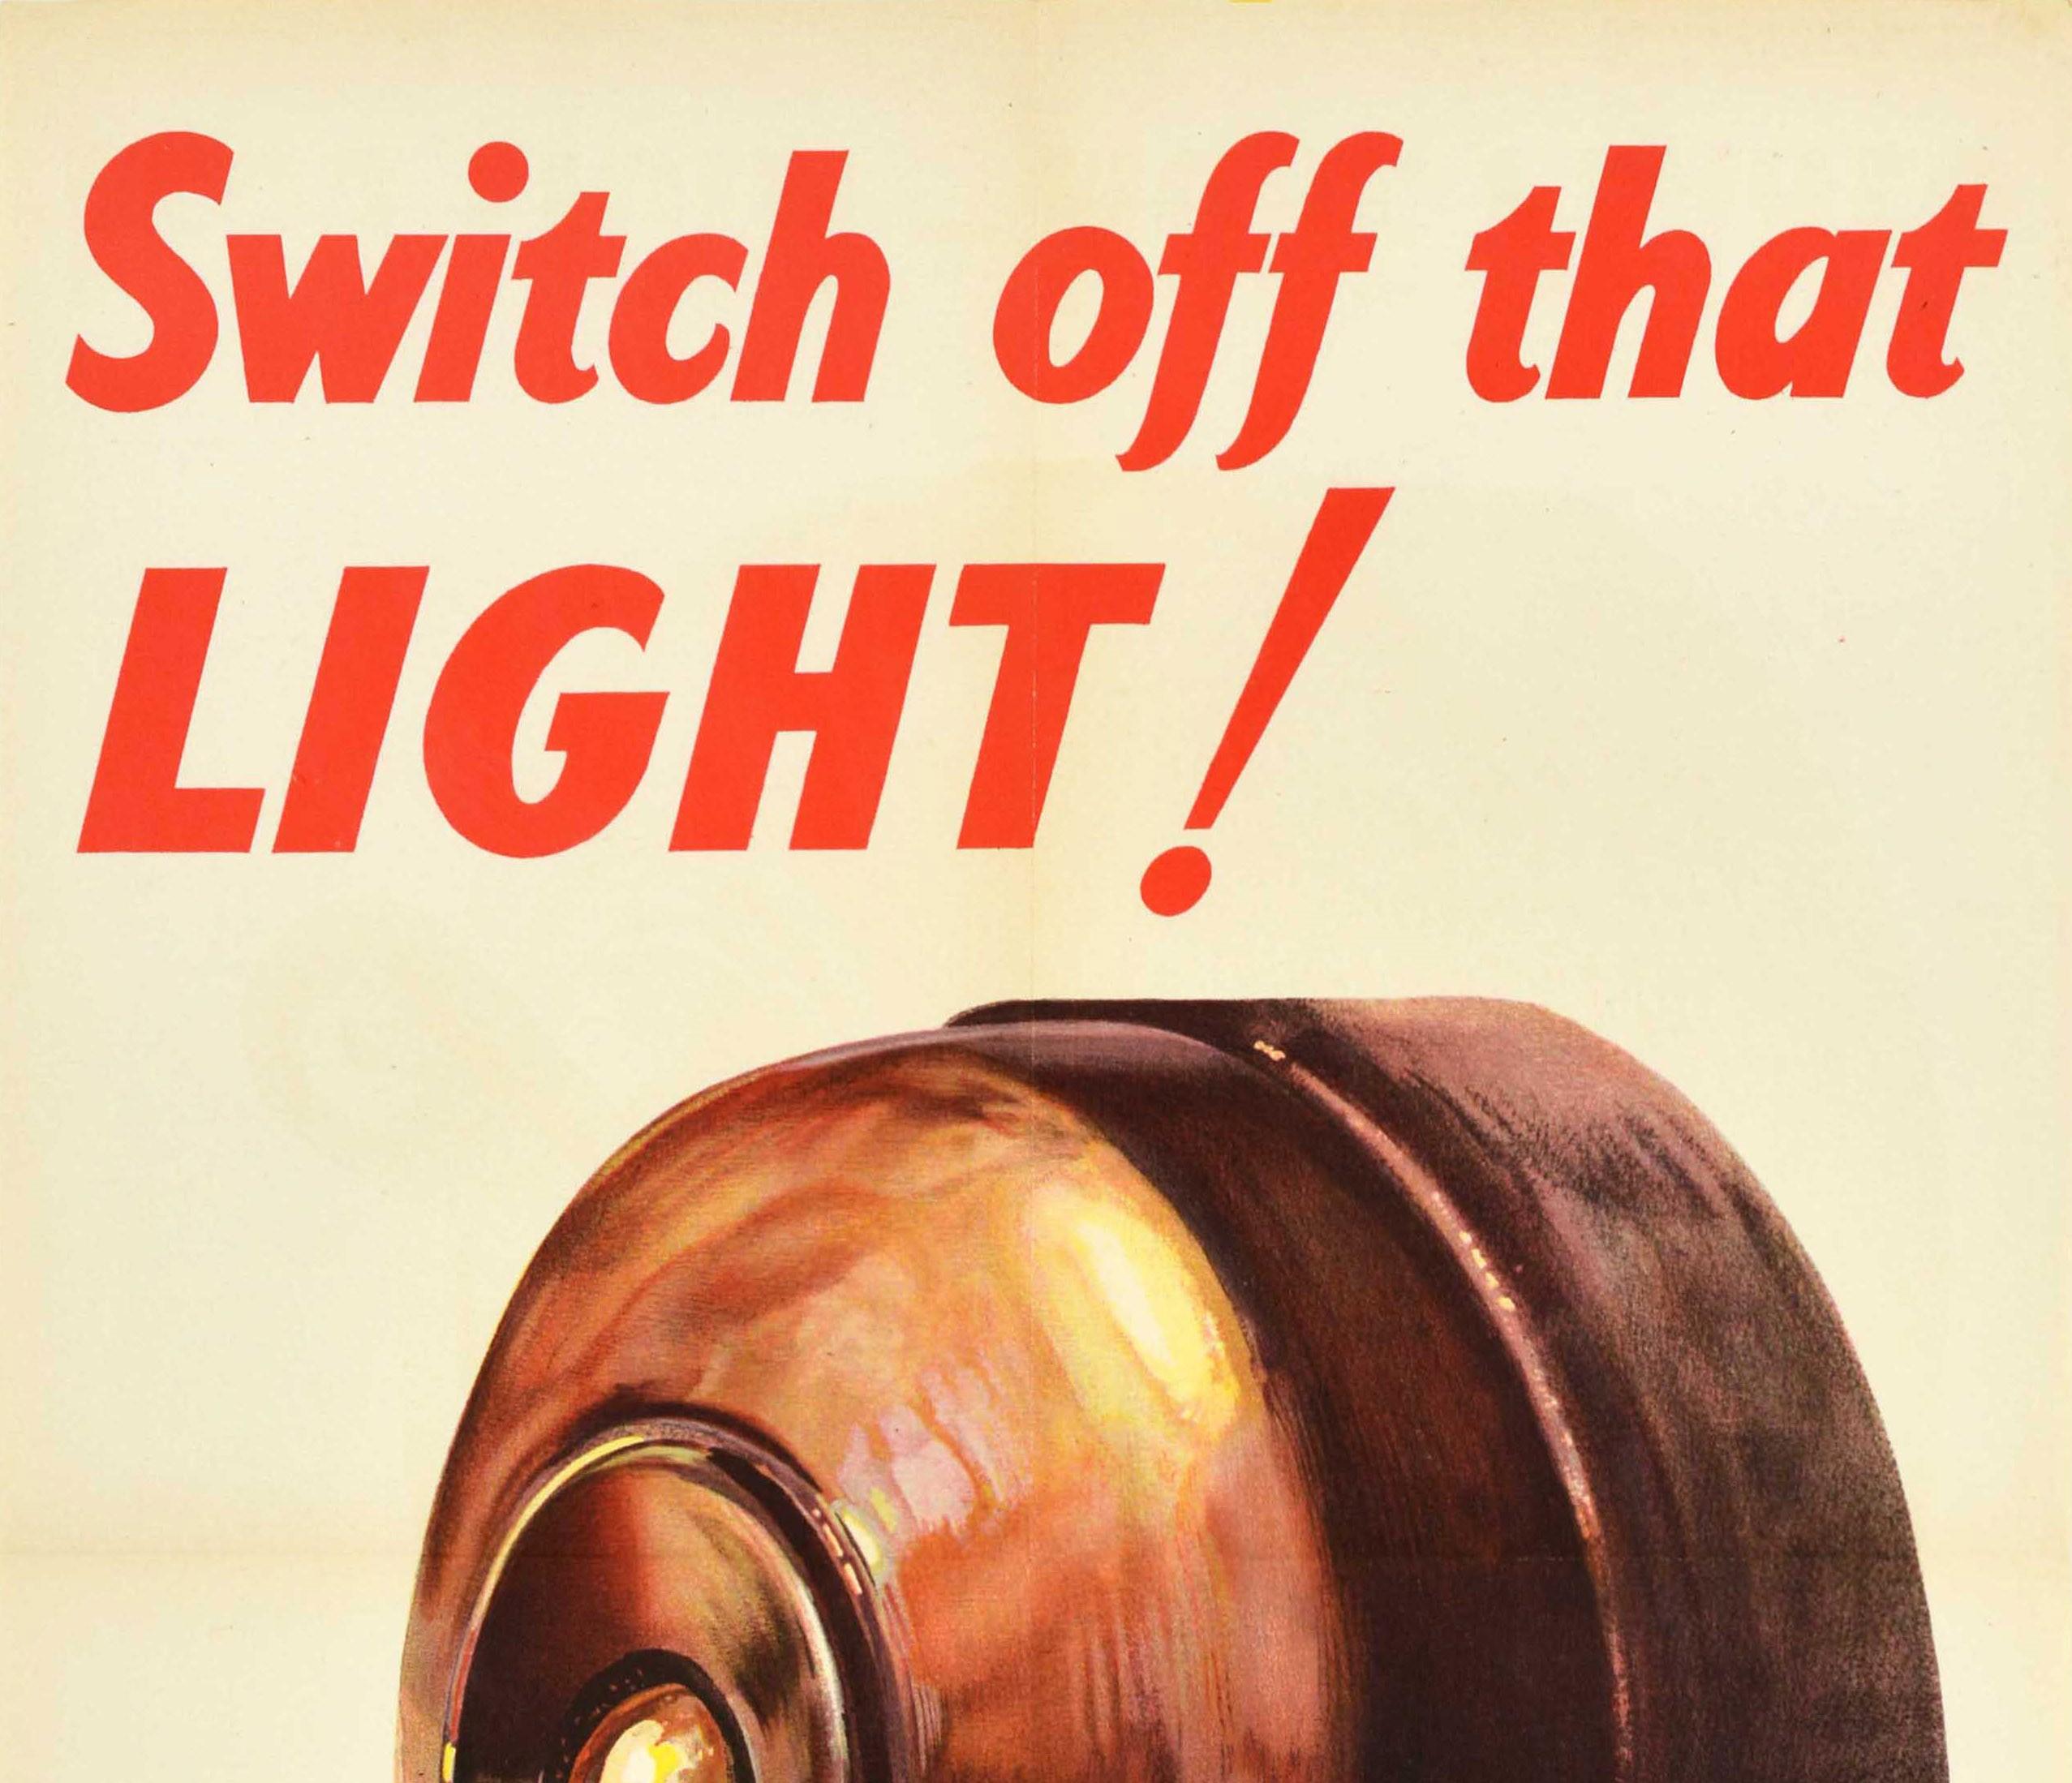 Original Vintage WWII Poster Switch Off That Light More Planes Home Front Saving - Print by Unknown